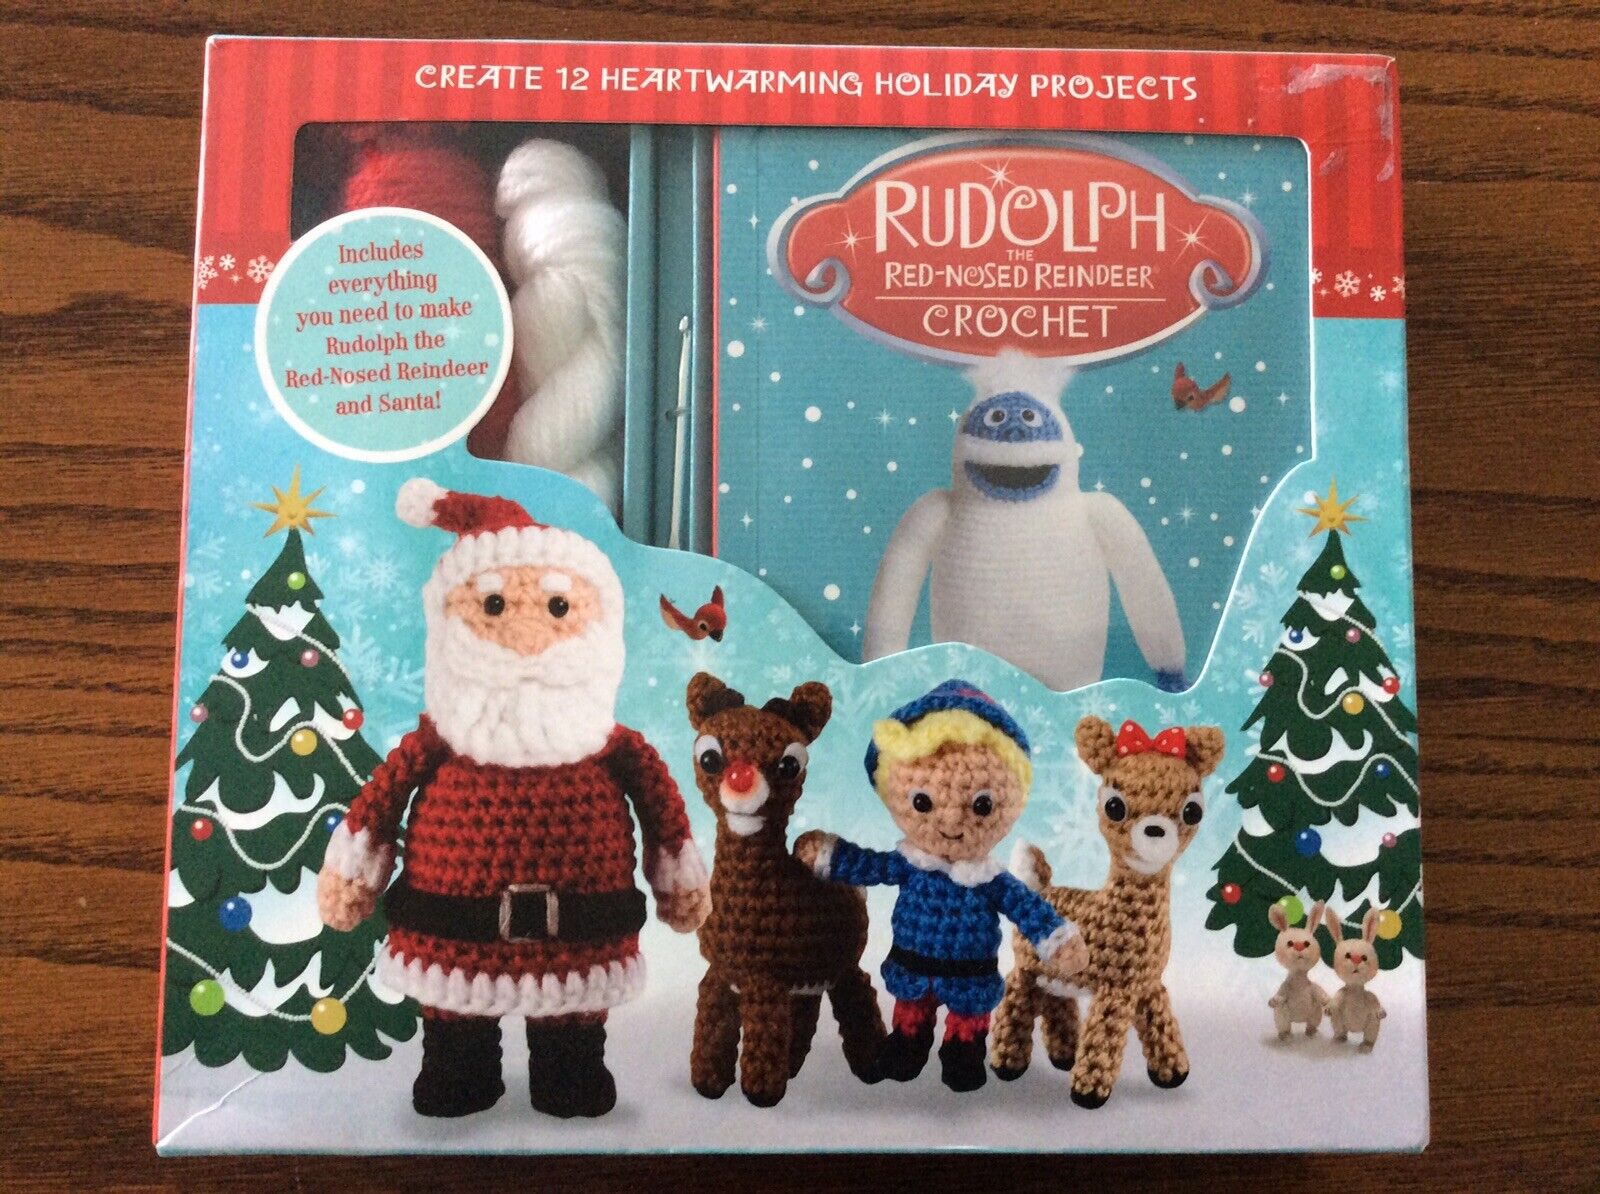 Rudolph the Red Nosed Reindeer CROCHET Kit - Box Opened, content